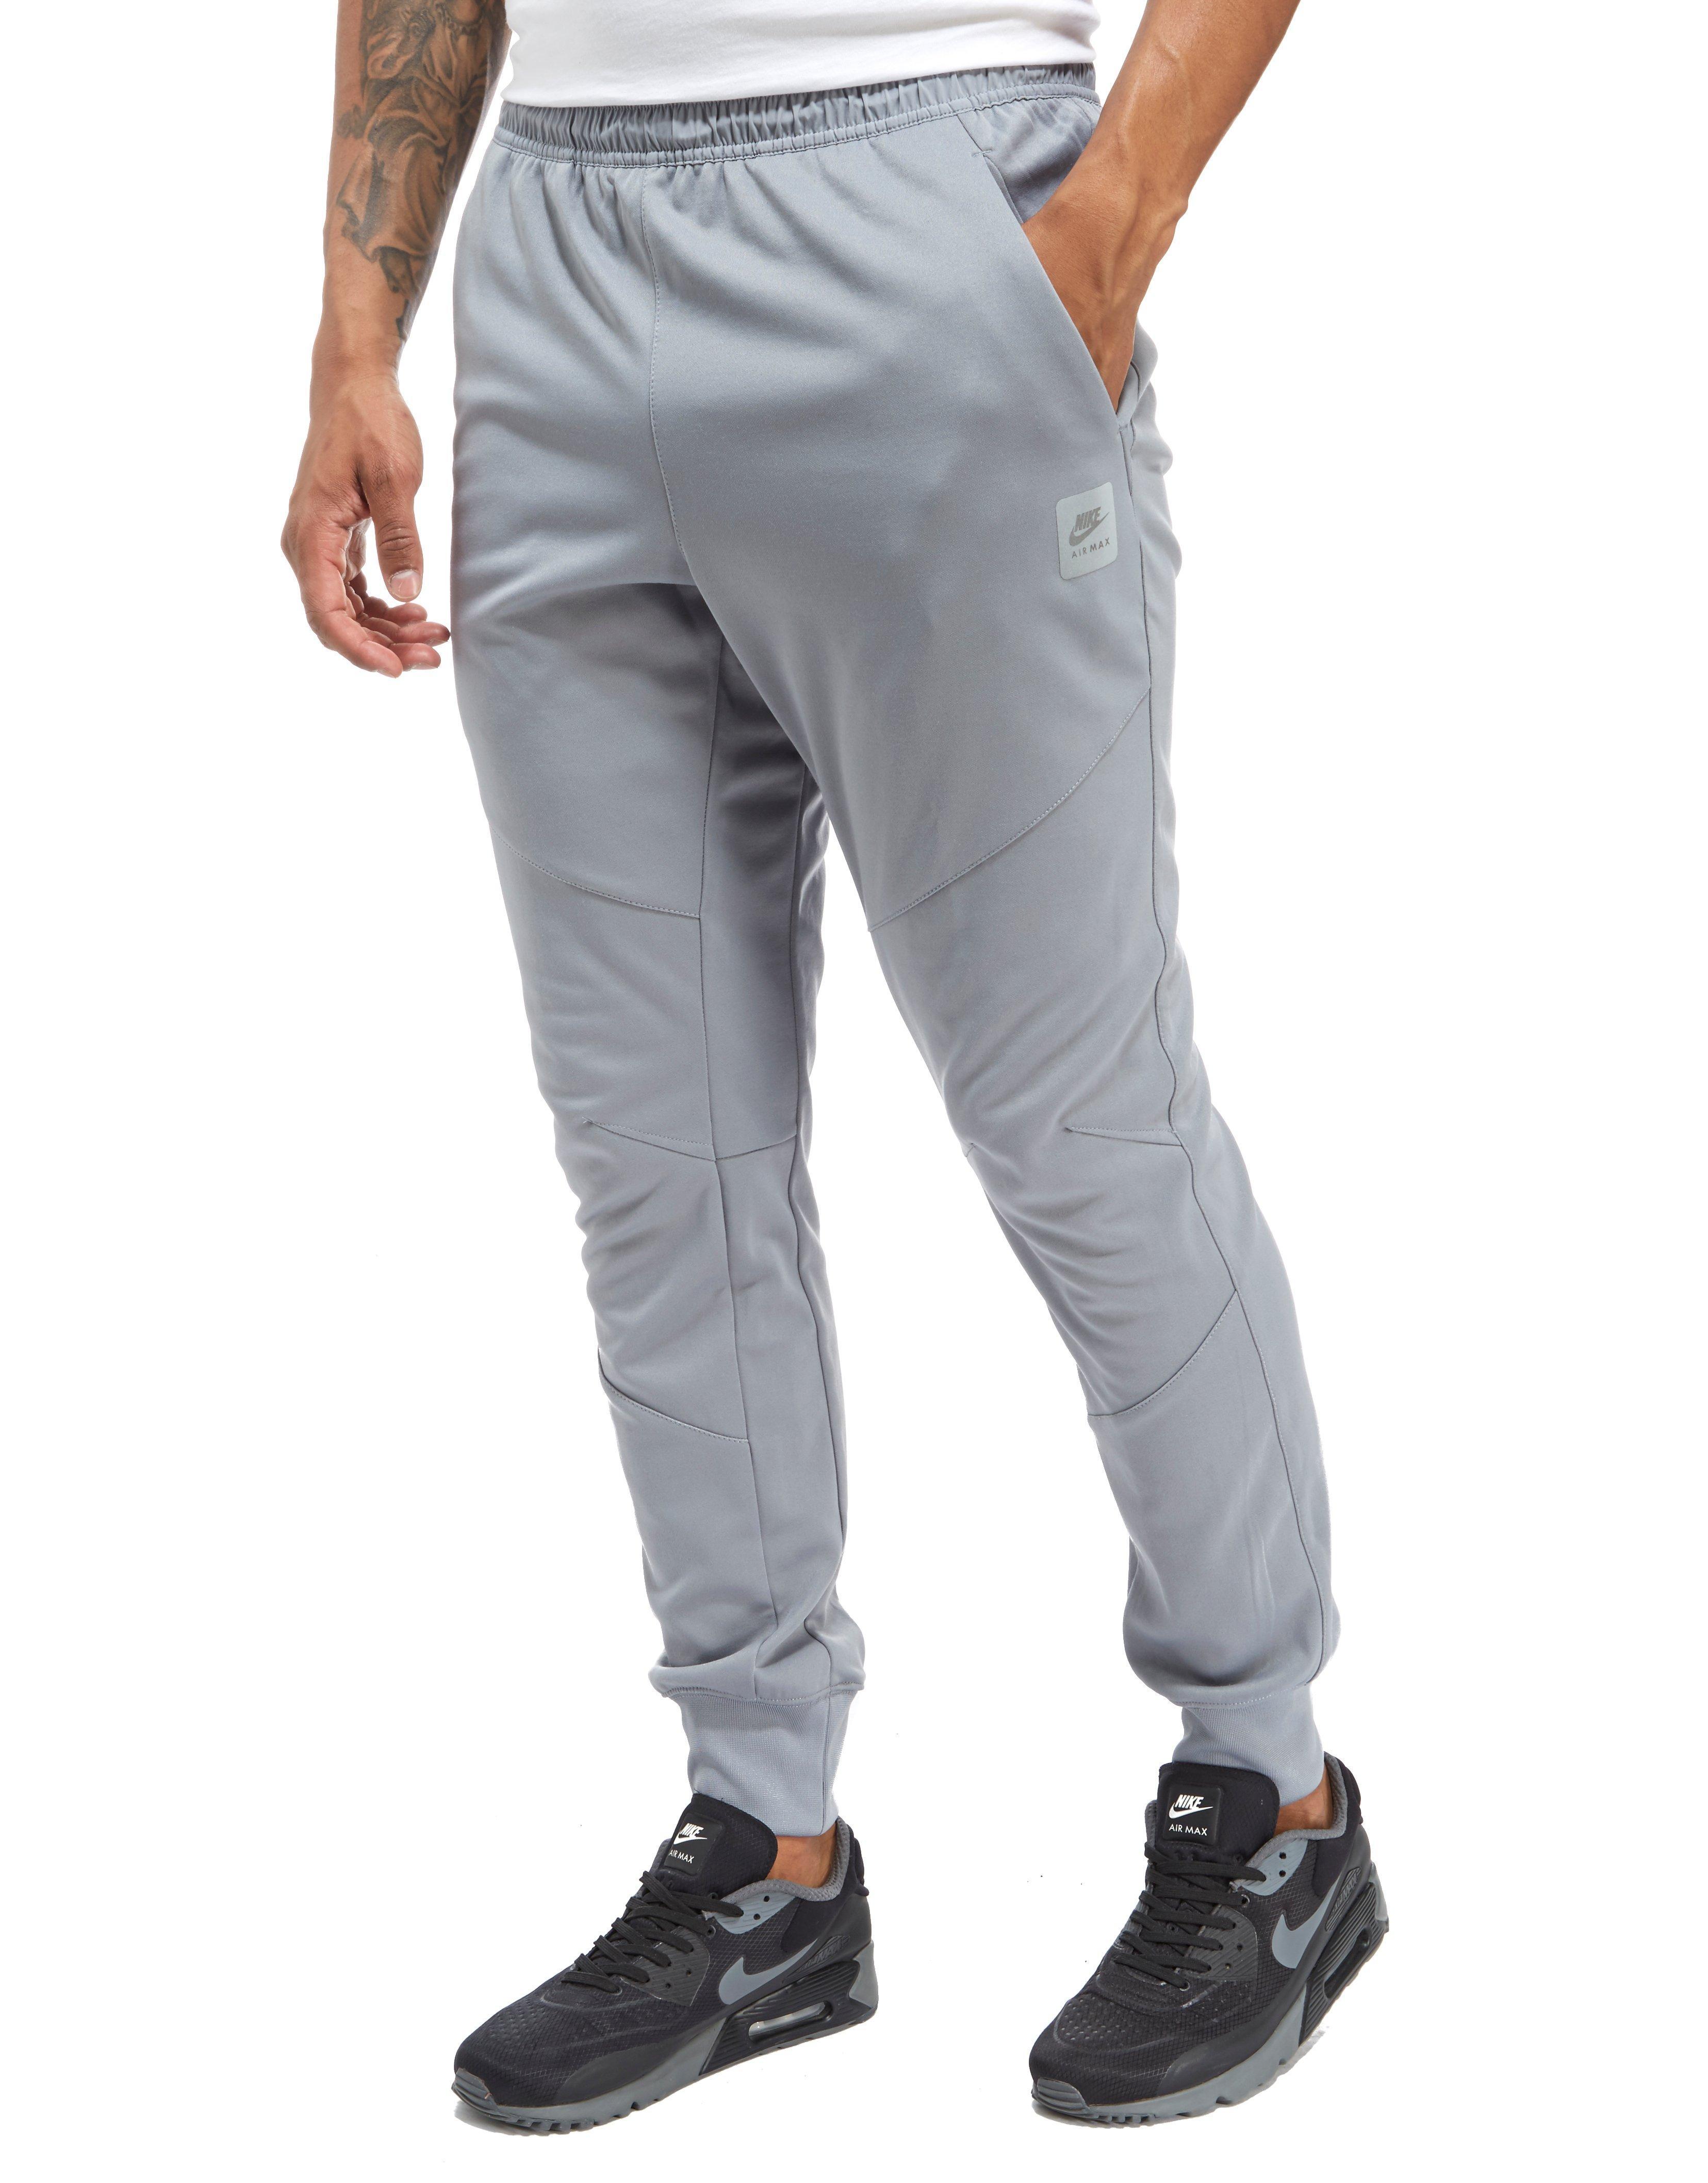 air max tracksuit bottoms Sale,up to 70 